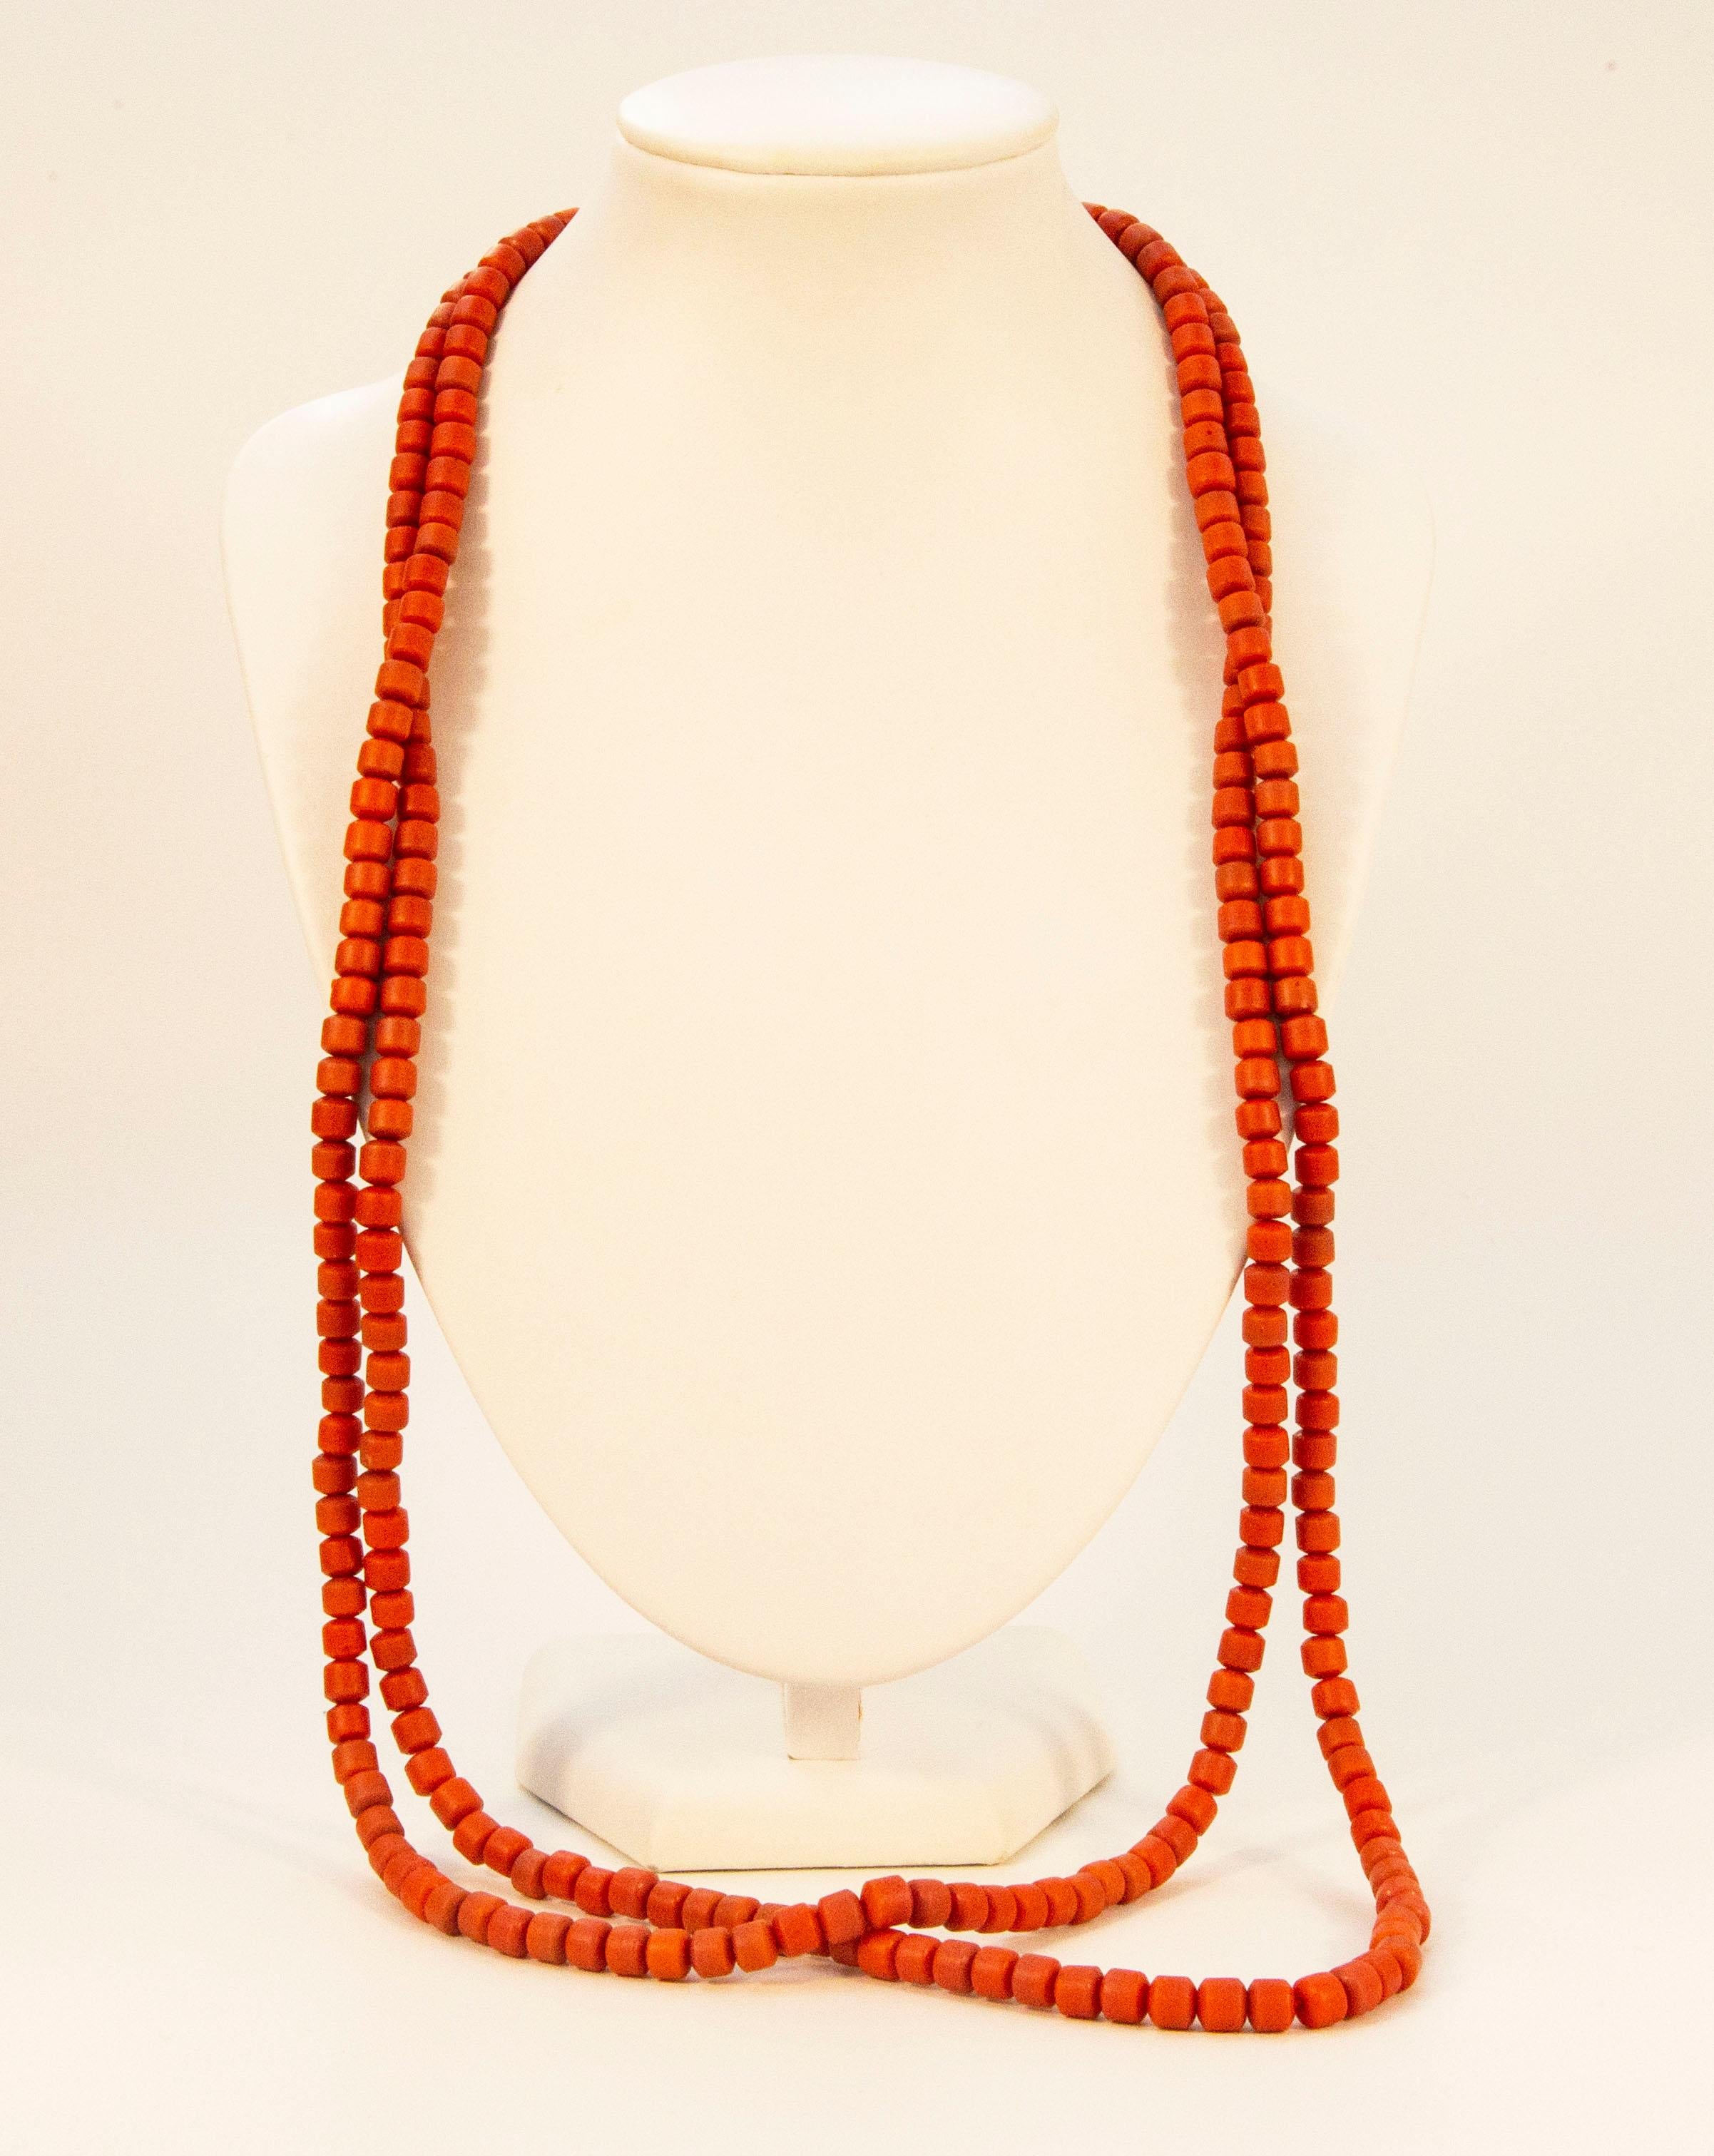 An antique one strand, very long, genuine red coral (Corallium Rubrum*) bead necklace with a brass barrel lock. The necklace was made at the beginning of the 20th century in the Netherlands. The coral beads are not dyed and the necklace was